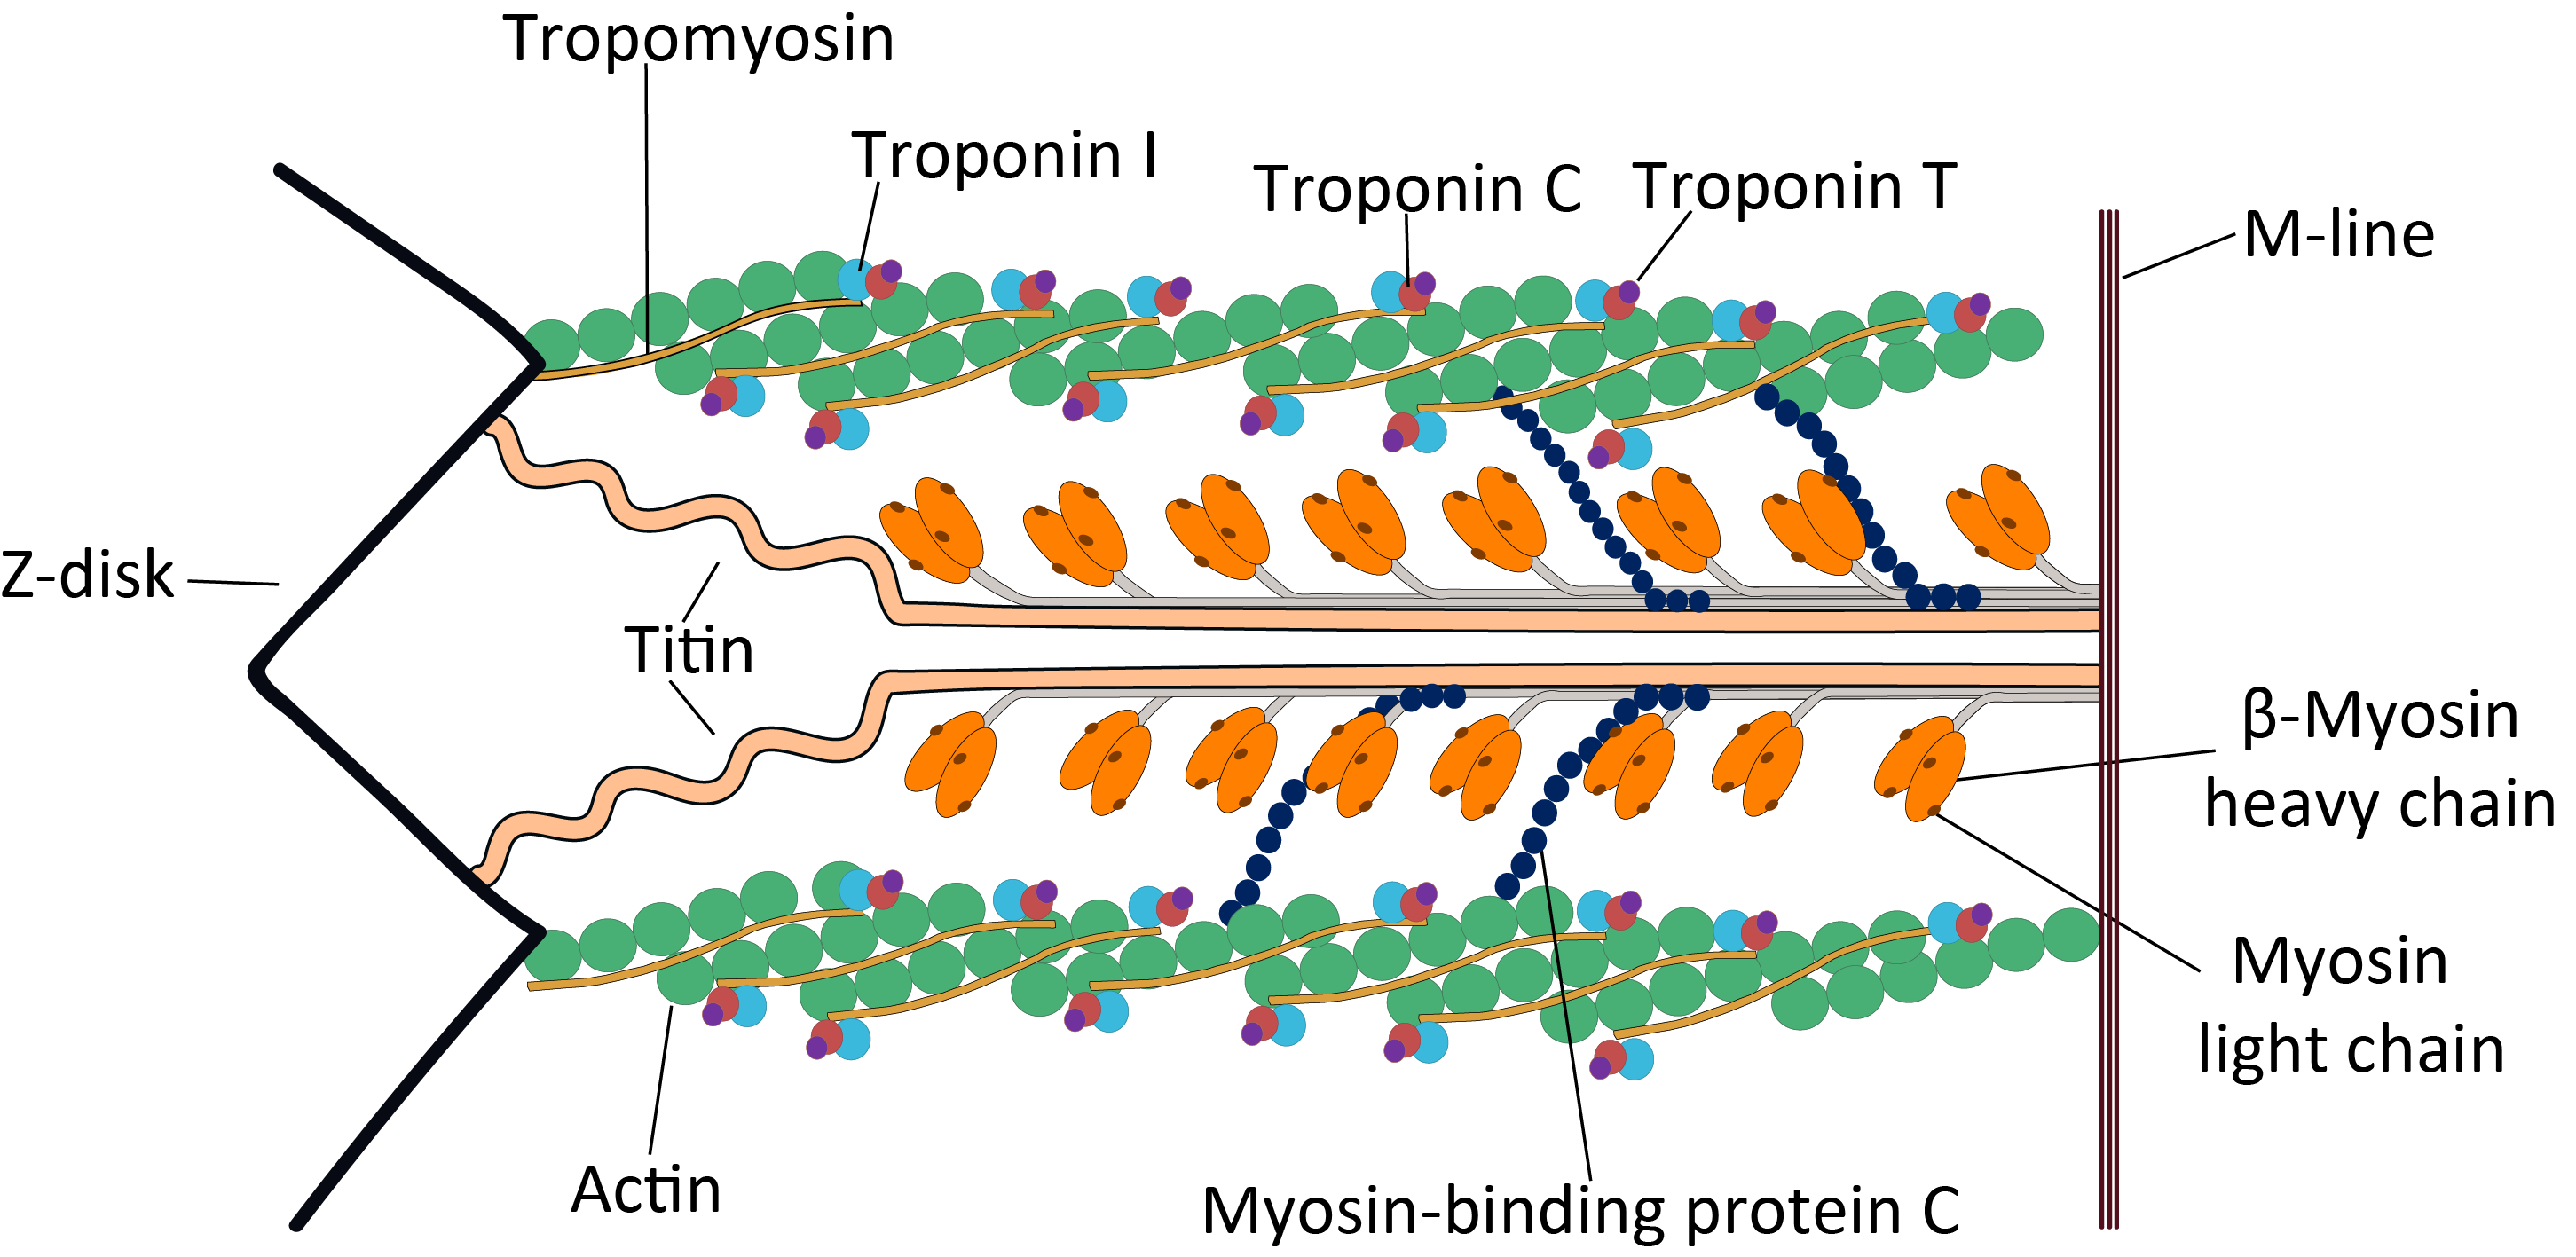 https://upload.wikimedia.org/wikipedia/commons/7/7f/Cardiac_sarcomere_structure.png